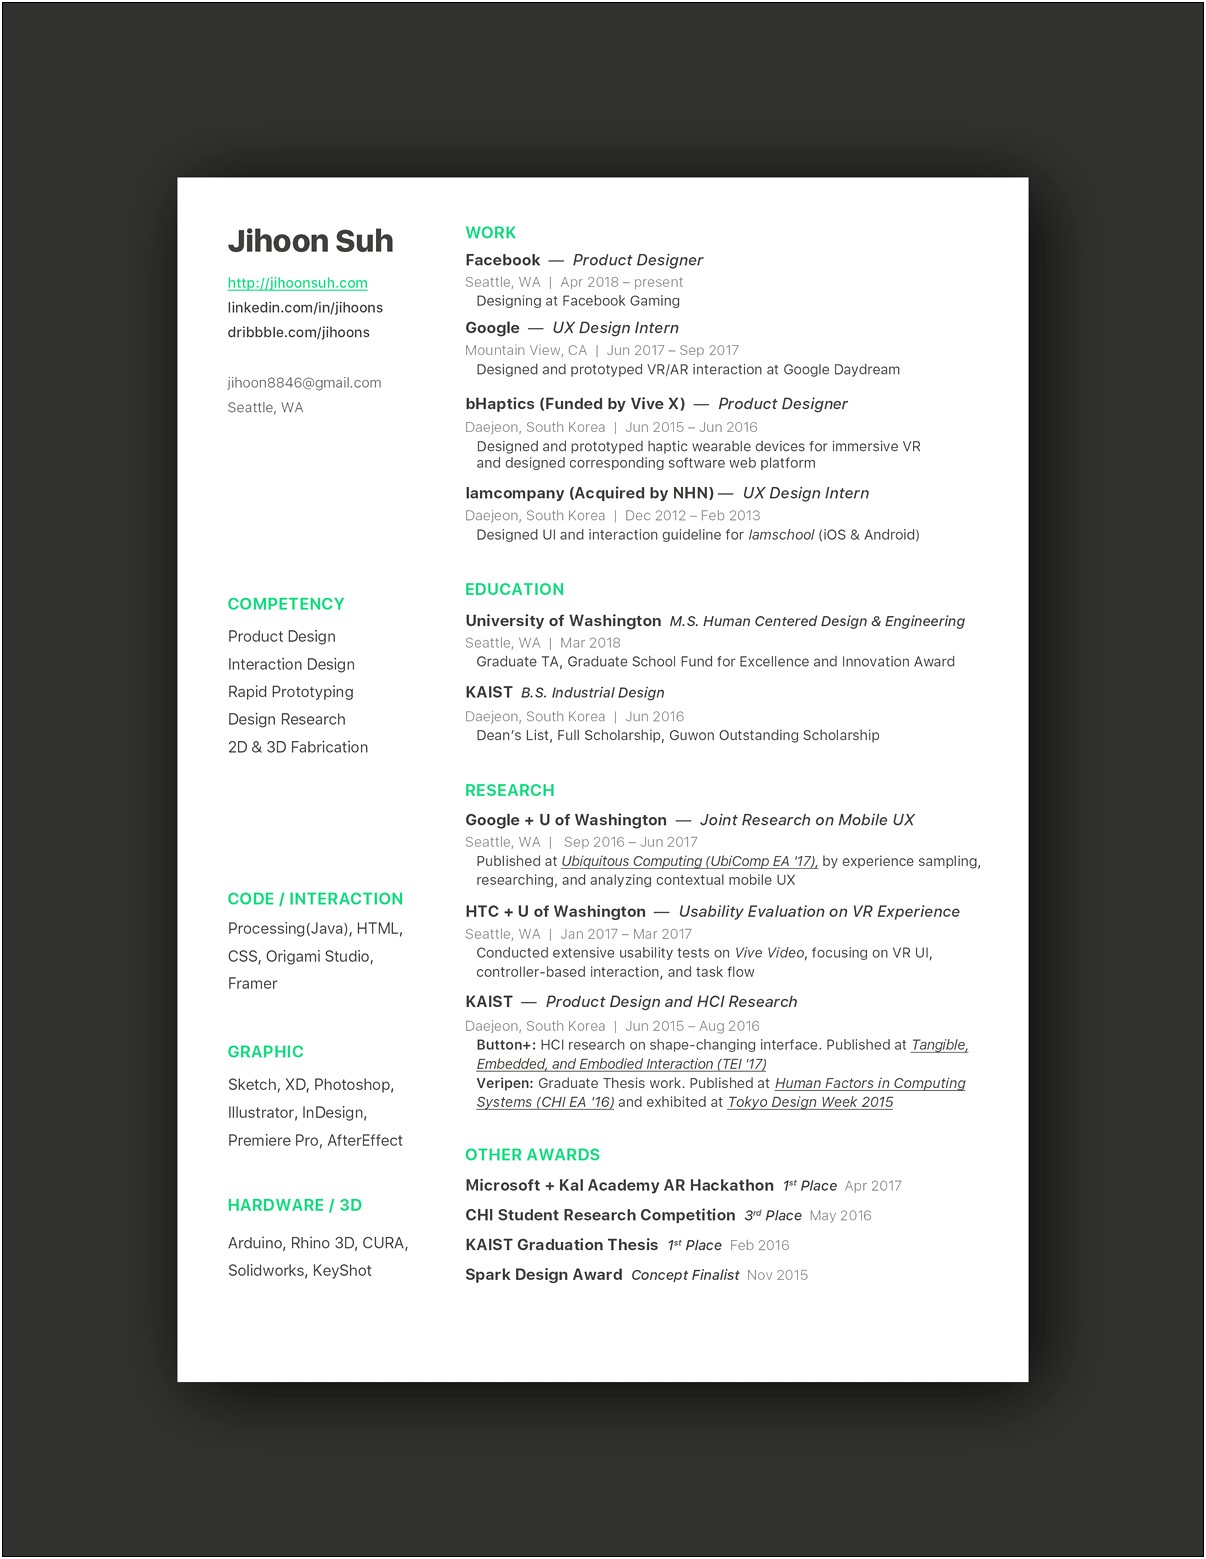 Personal Resume Example For Scholarship